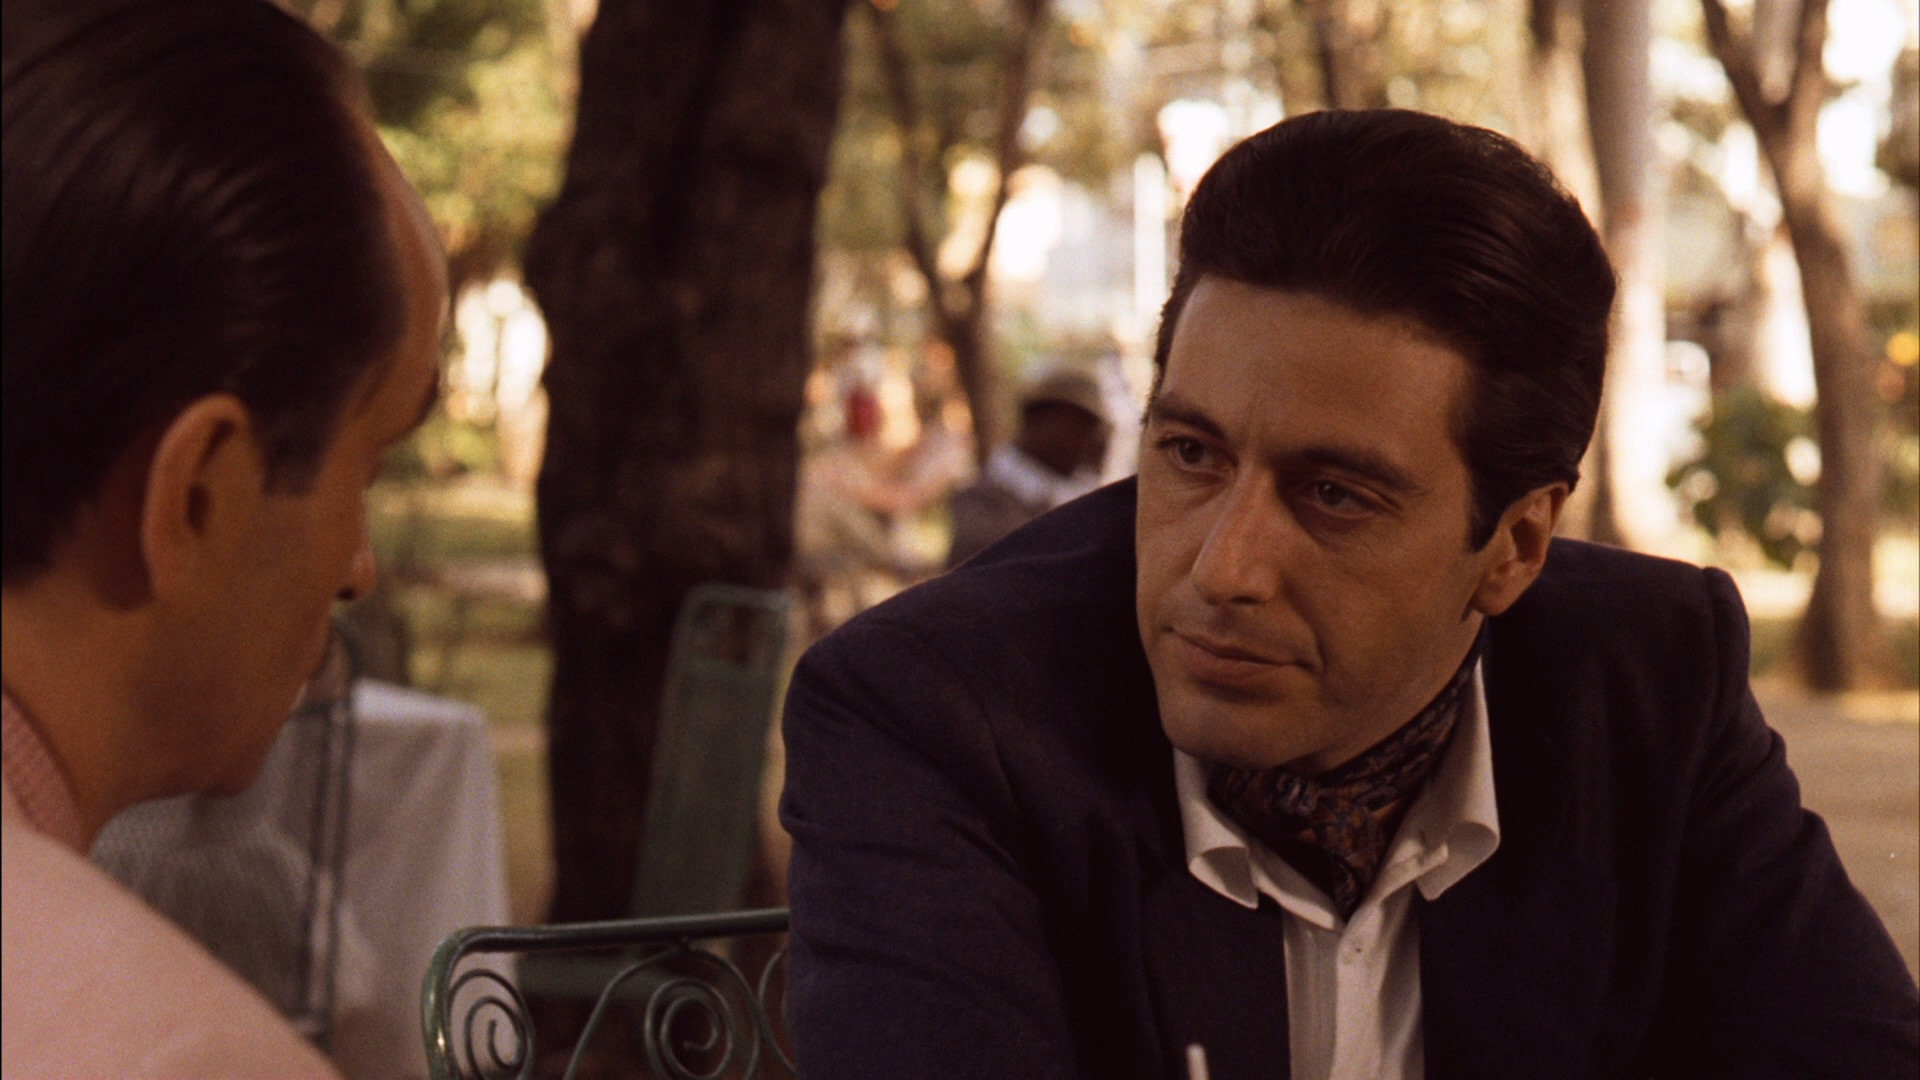 The Godfather 2 Wallpapers Wallpapers) Adorable Wallpapers - Godfather Part  2 - 1920x1080 Wallpaper 